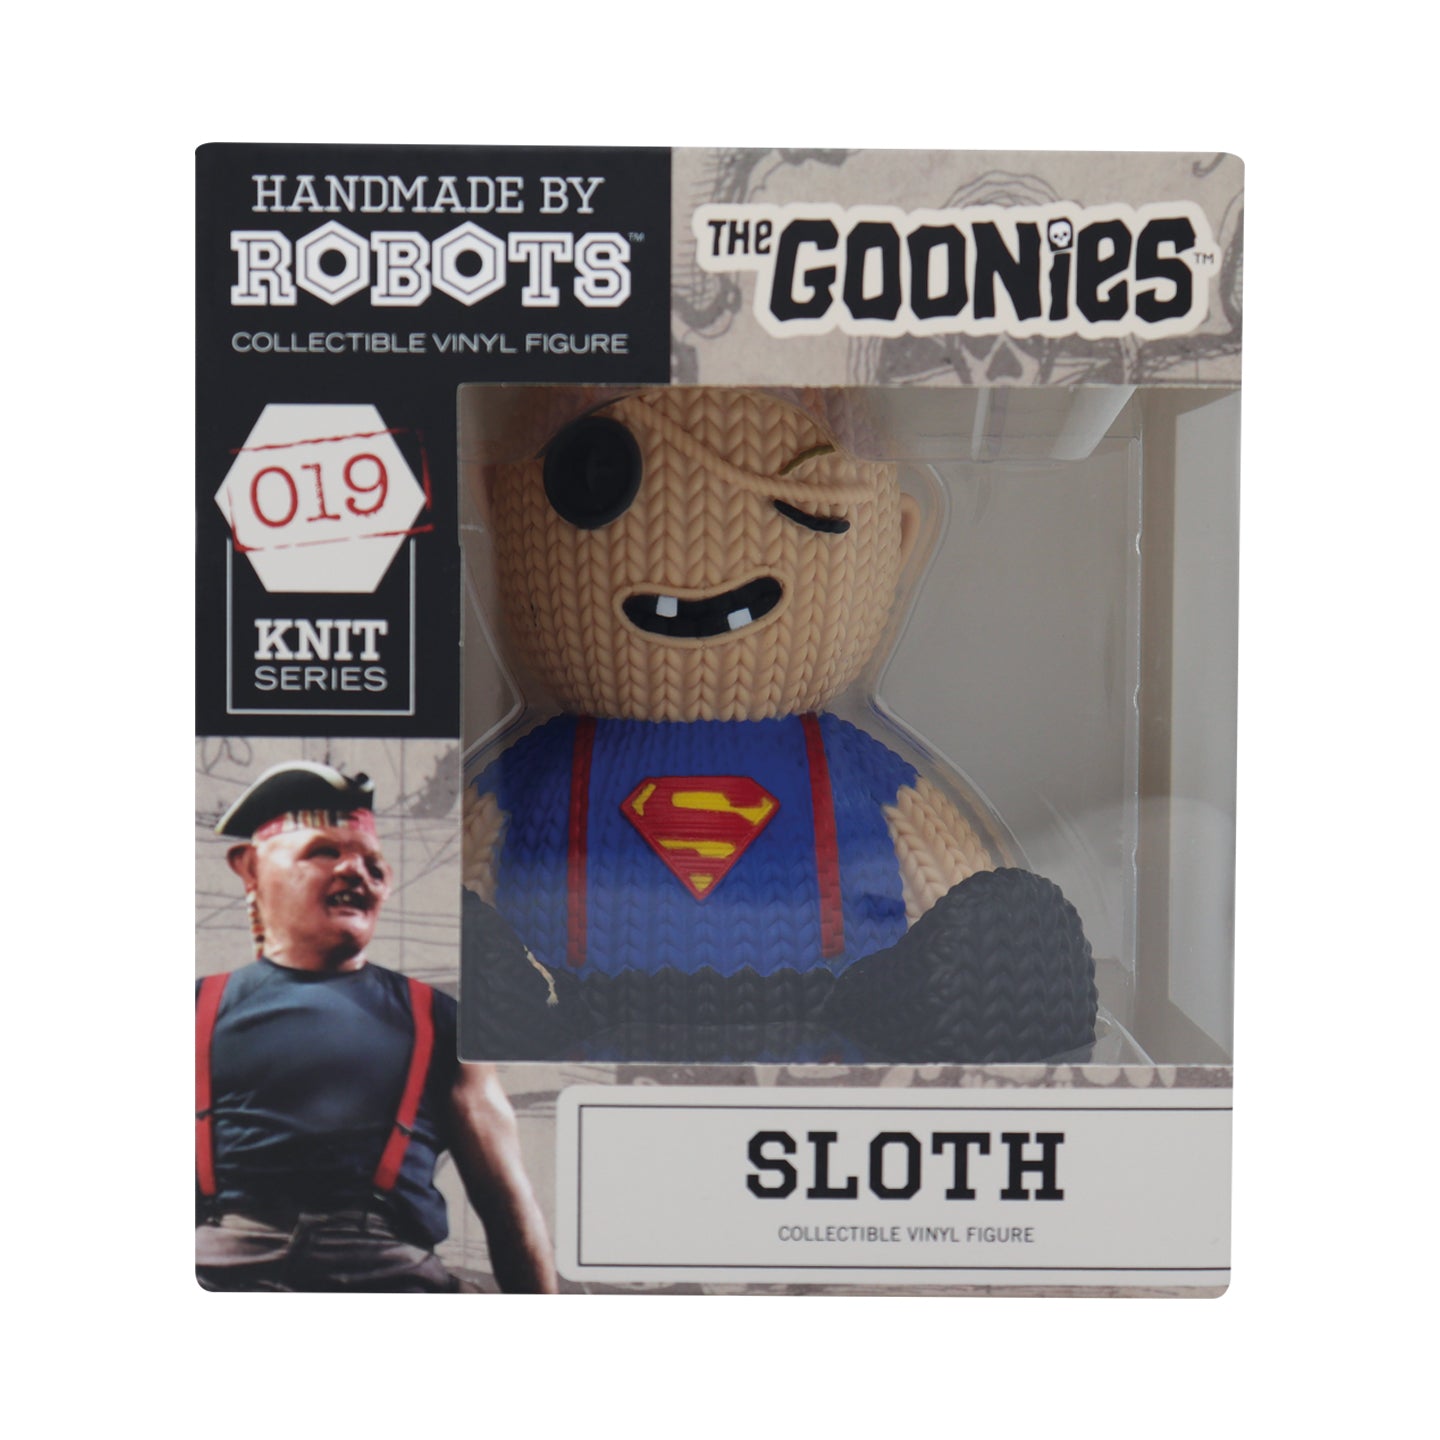 The Goonies - Sloth Collectible Vinyl Figure from Handmade By Robots